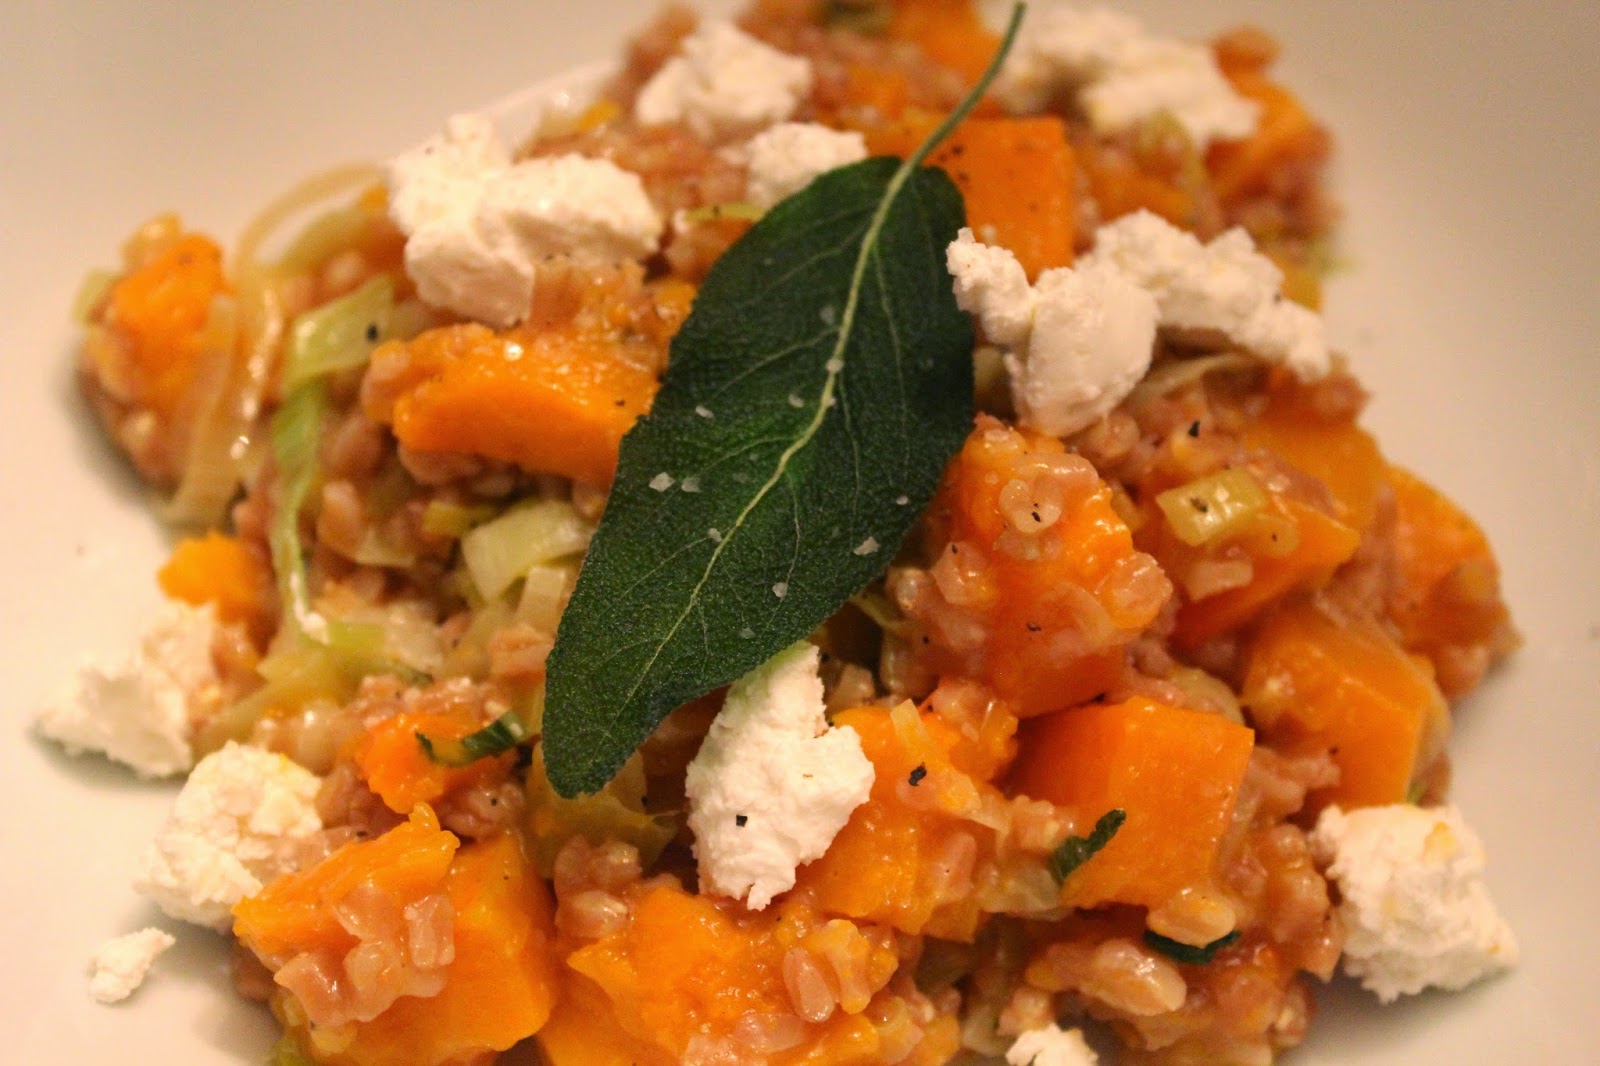 Farrotto with butternut squash, sage, and goat cheese